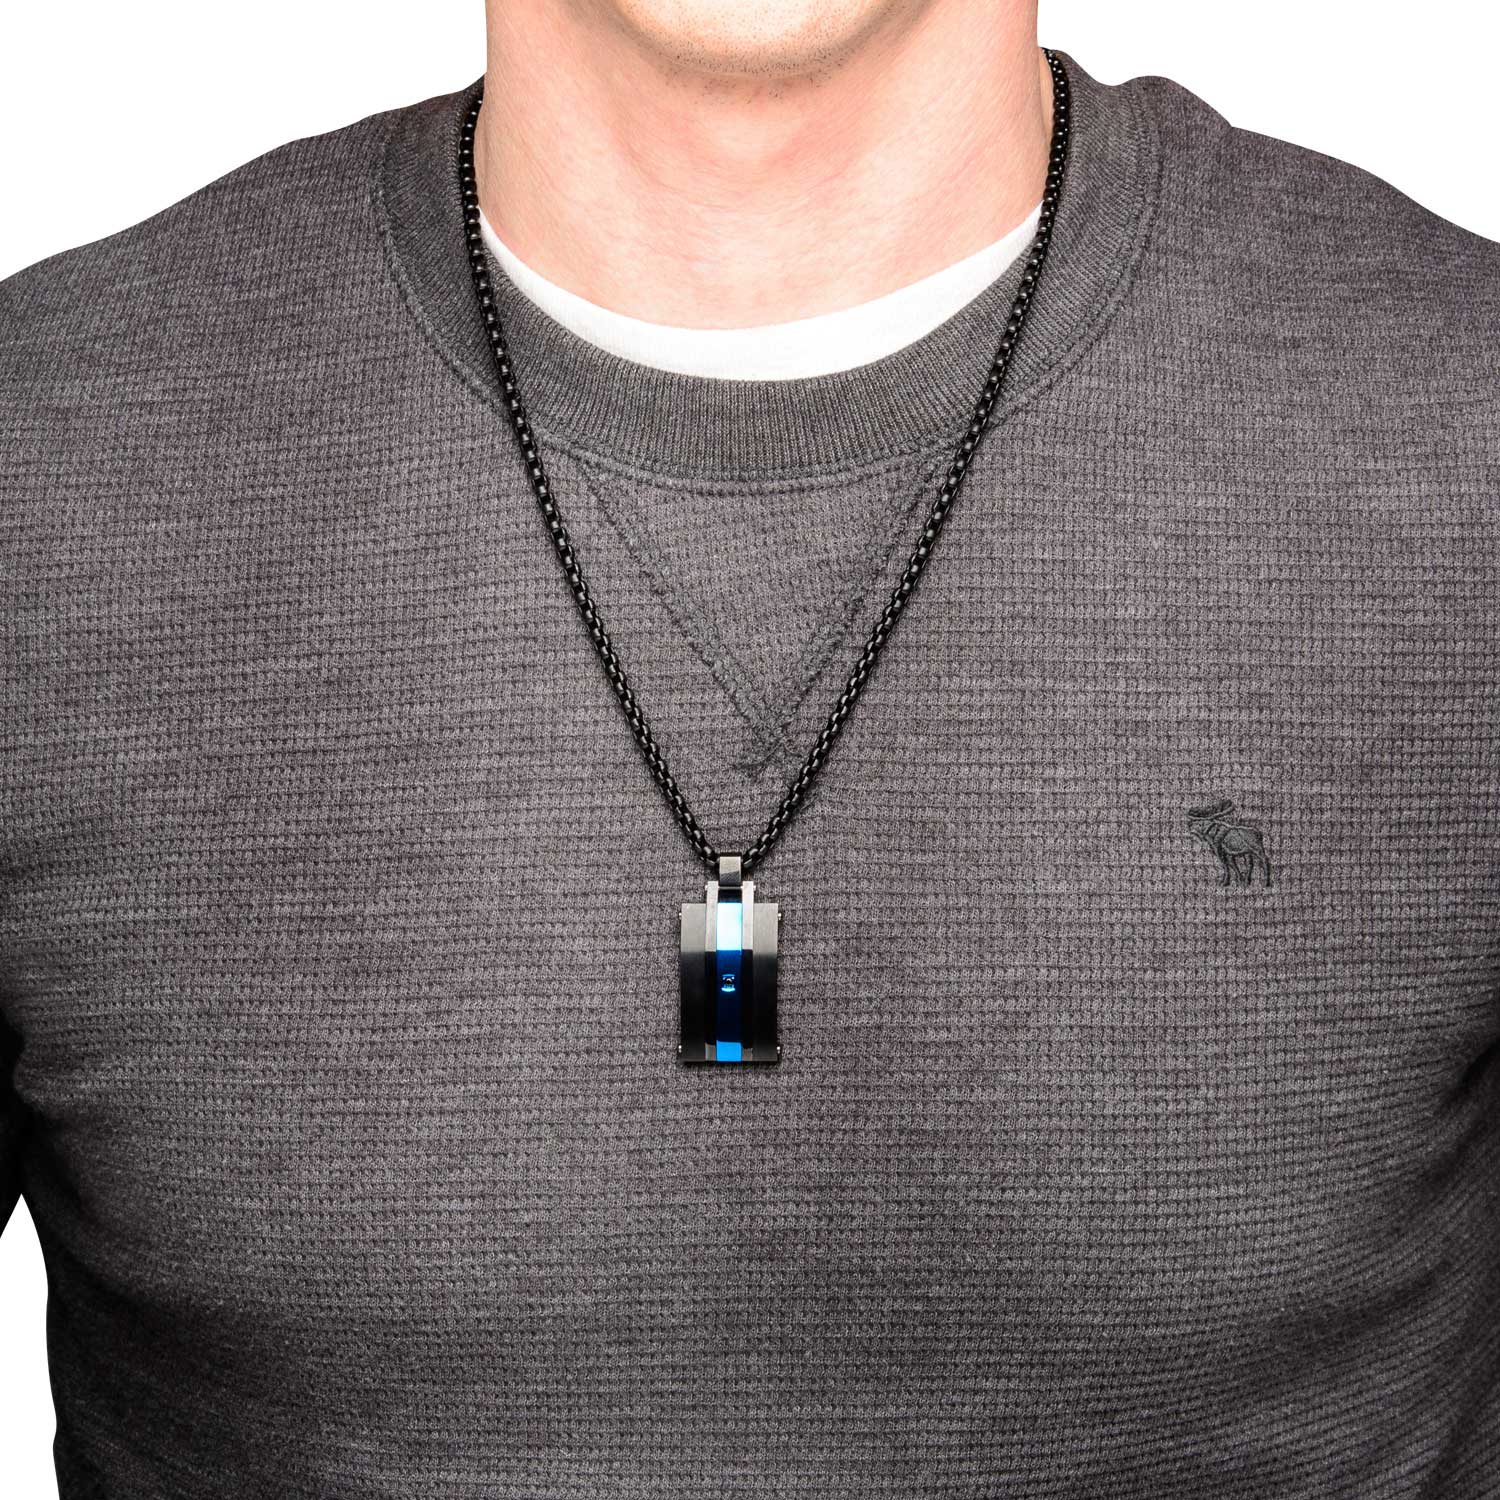 Matte Finished Black & Blue Plated with Black CZ Pendant with Chain Image 4 Milano Jewelers Pembroke Pines, FL